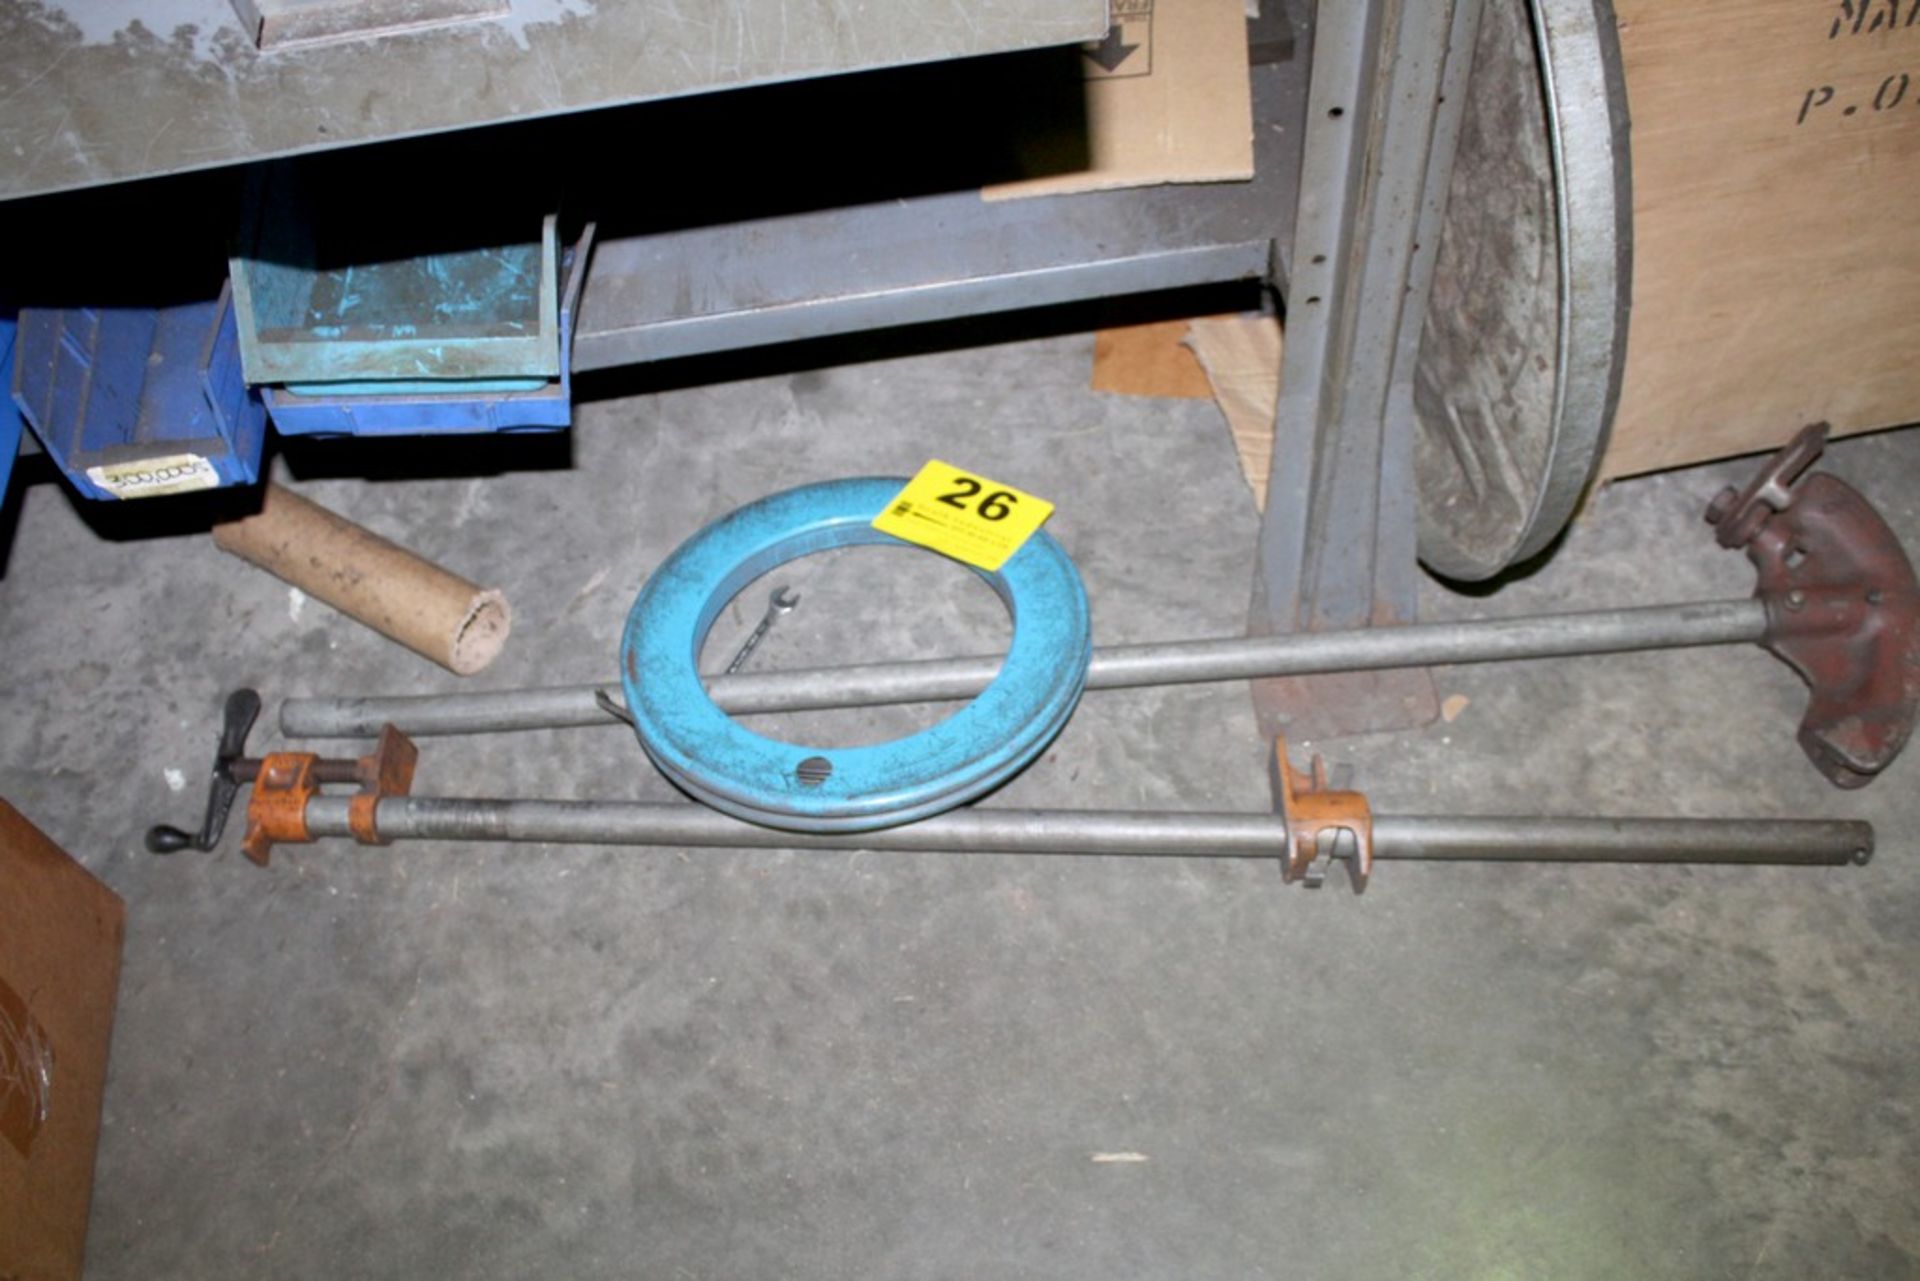 PIPE BENDER, BAR CLAMP, AND STEEL FISH TAPE